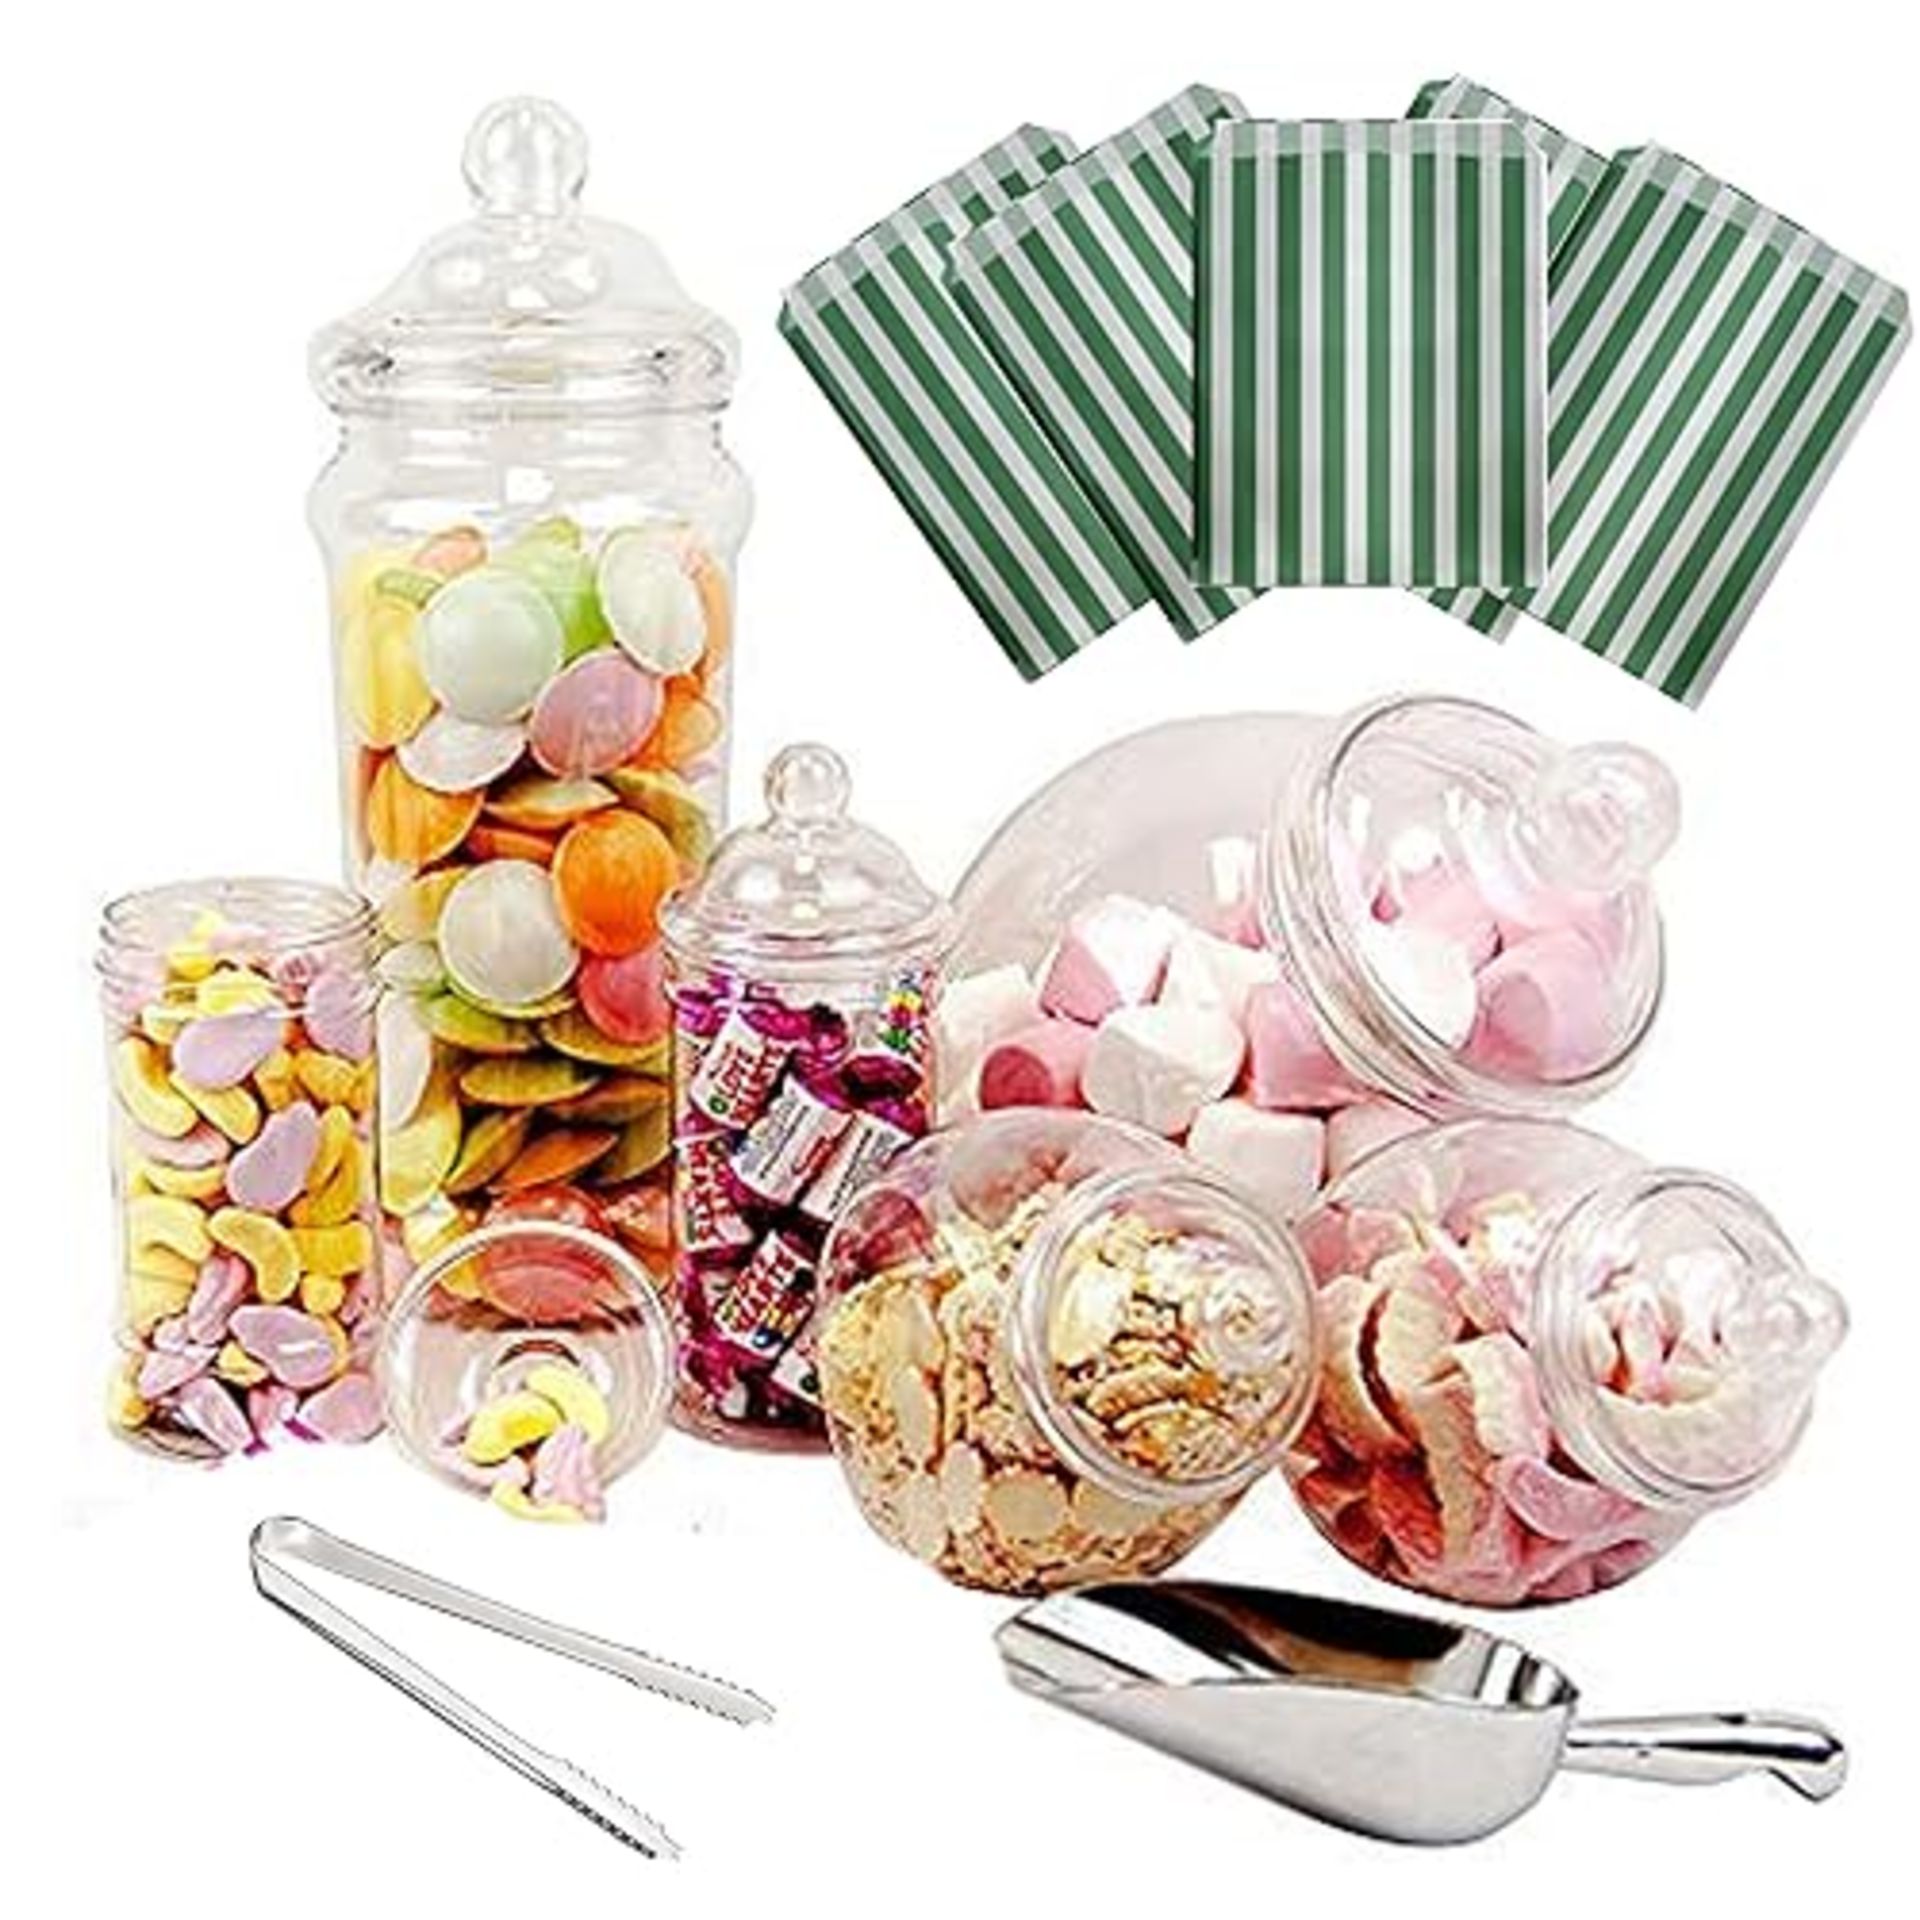 6 Jar Retro Pick & Mix Victorian Sweet Shop Candy Buffet Kit Party Pack with Scoop, Tongs & Bags - 